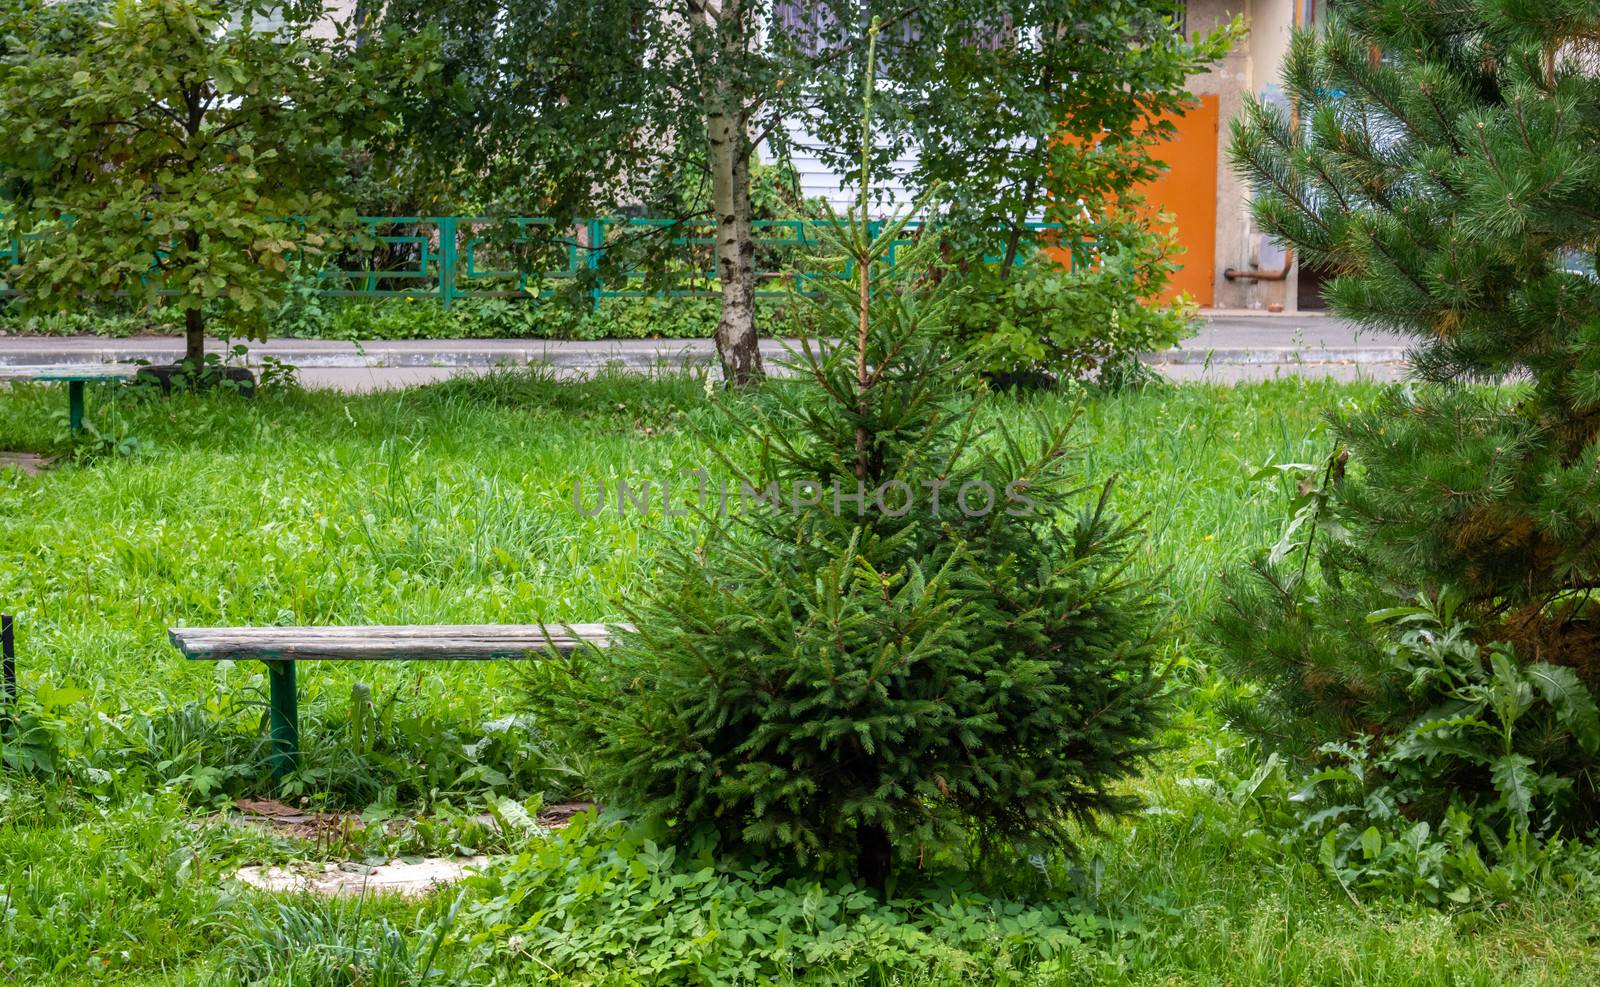 In the courtyard there is a simple wooden bench and a green Christmas tree by lapushka62